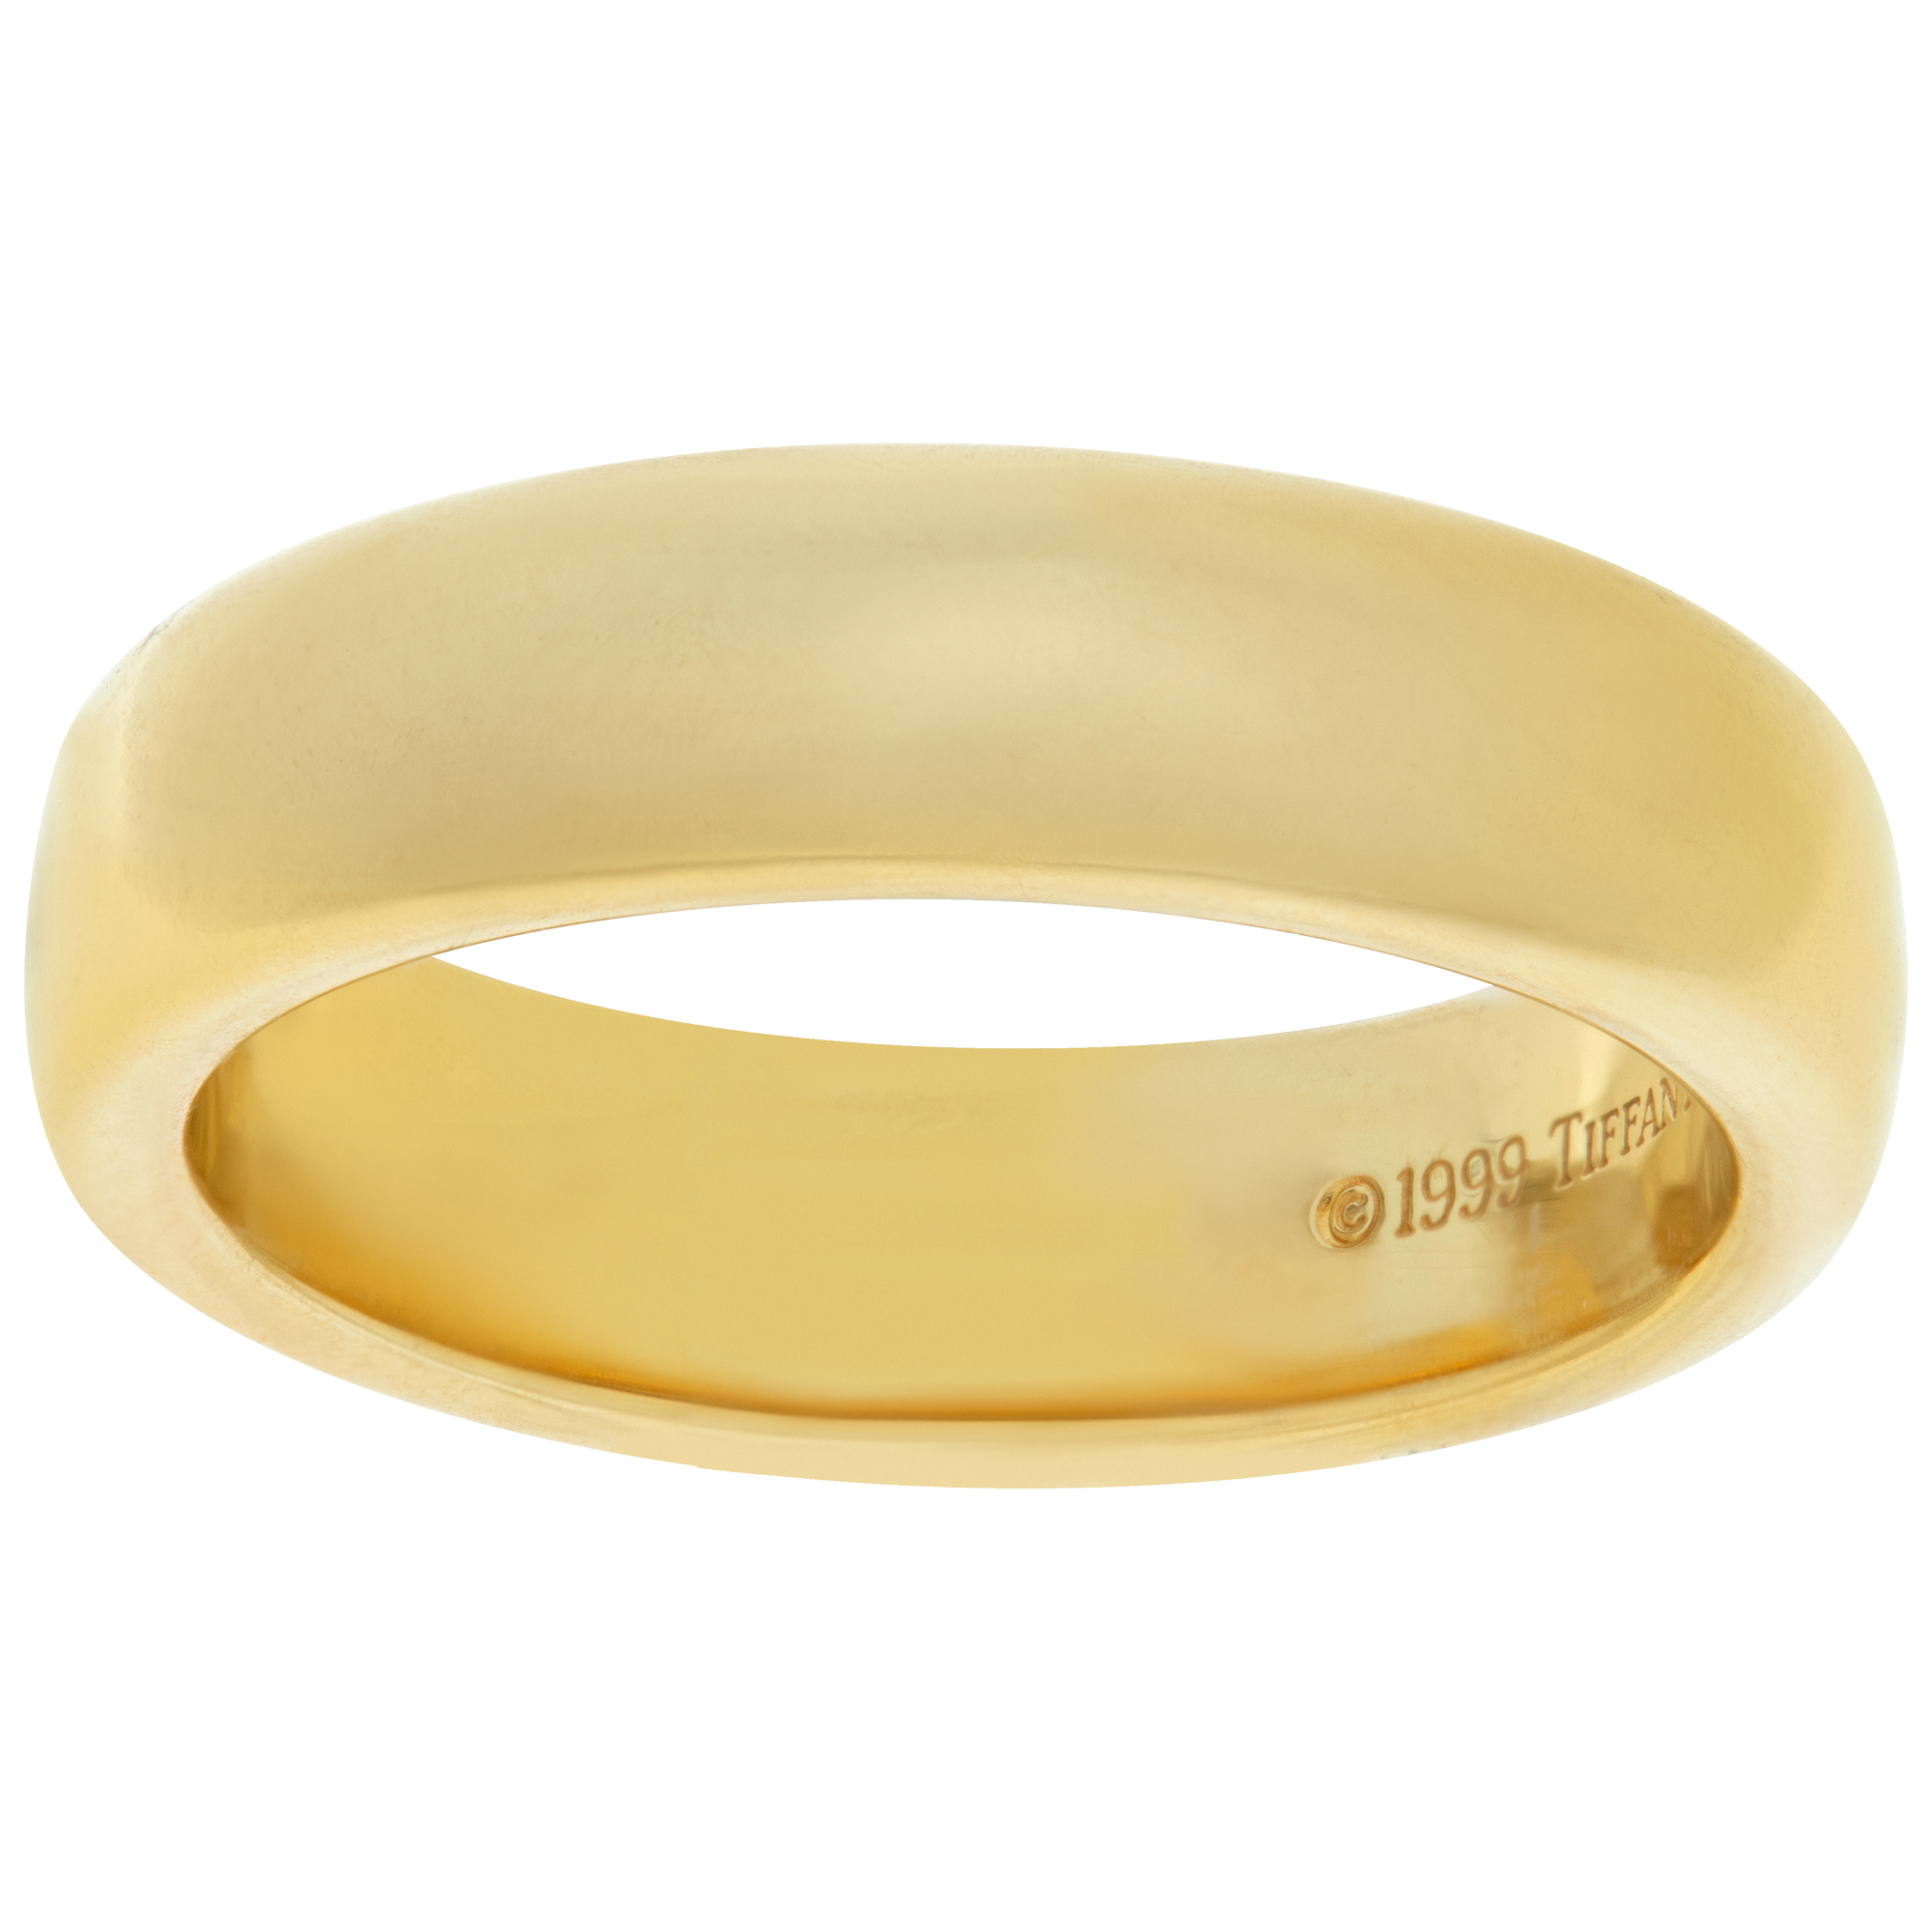 Tiffany & Co. Classic wedding band in 18k yellow gold, 4.5mm wide